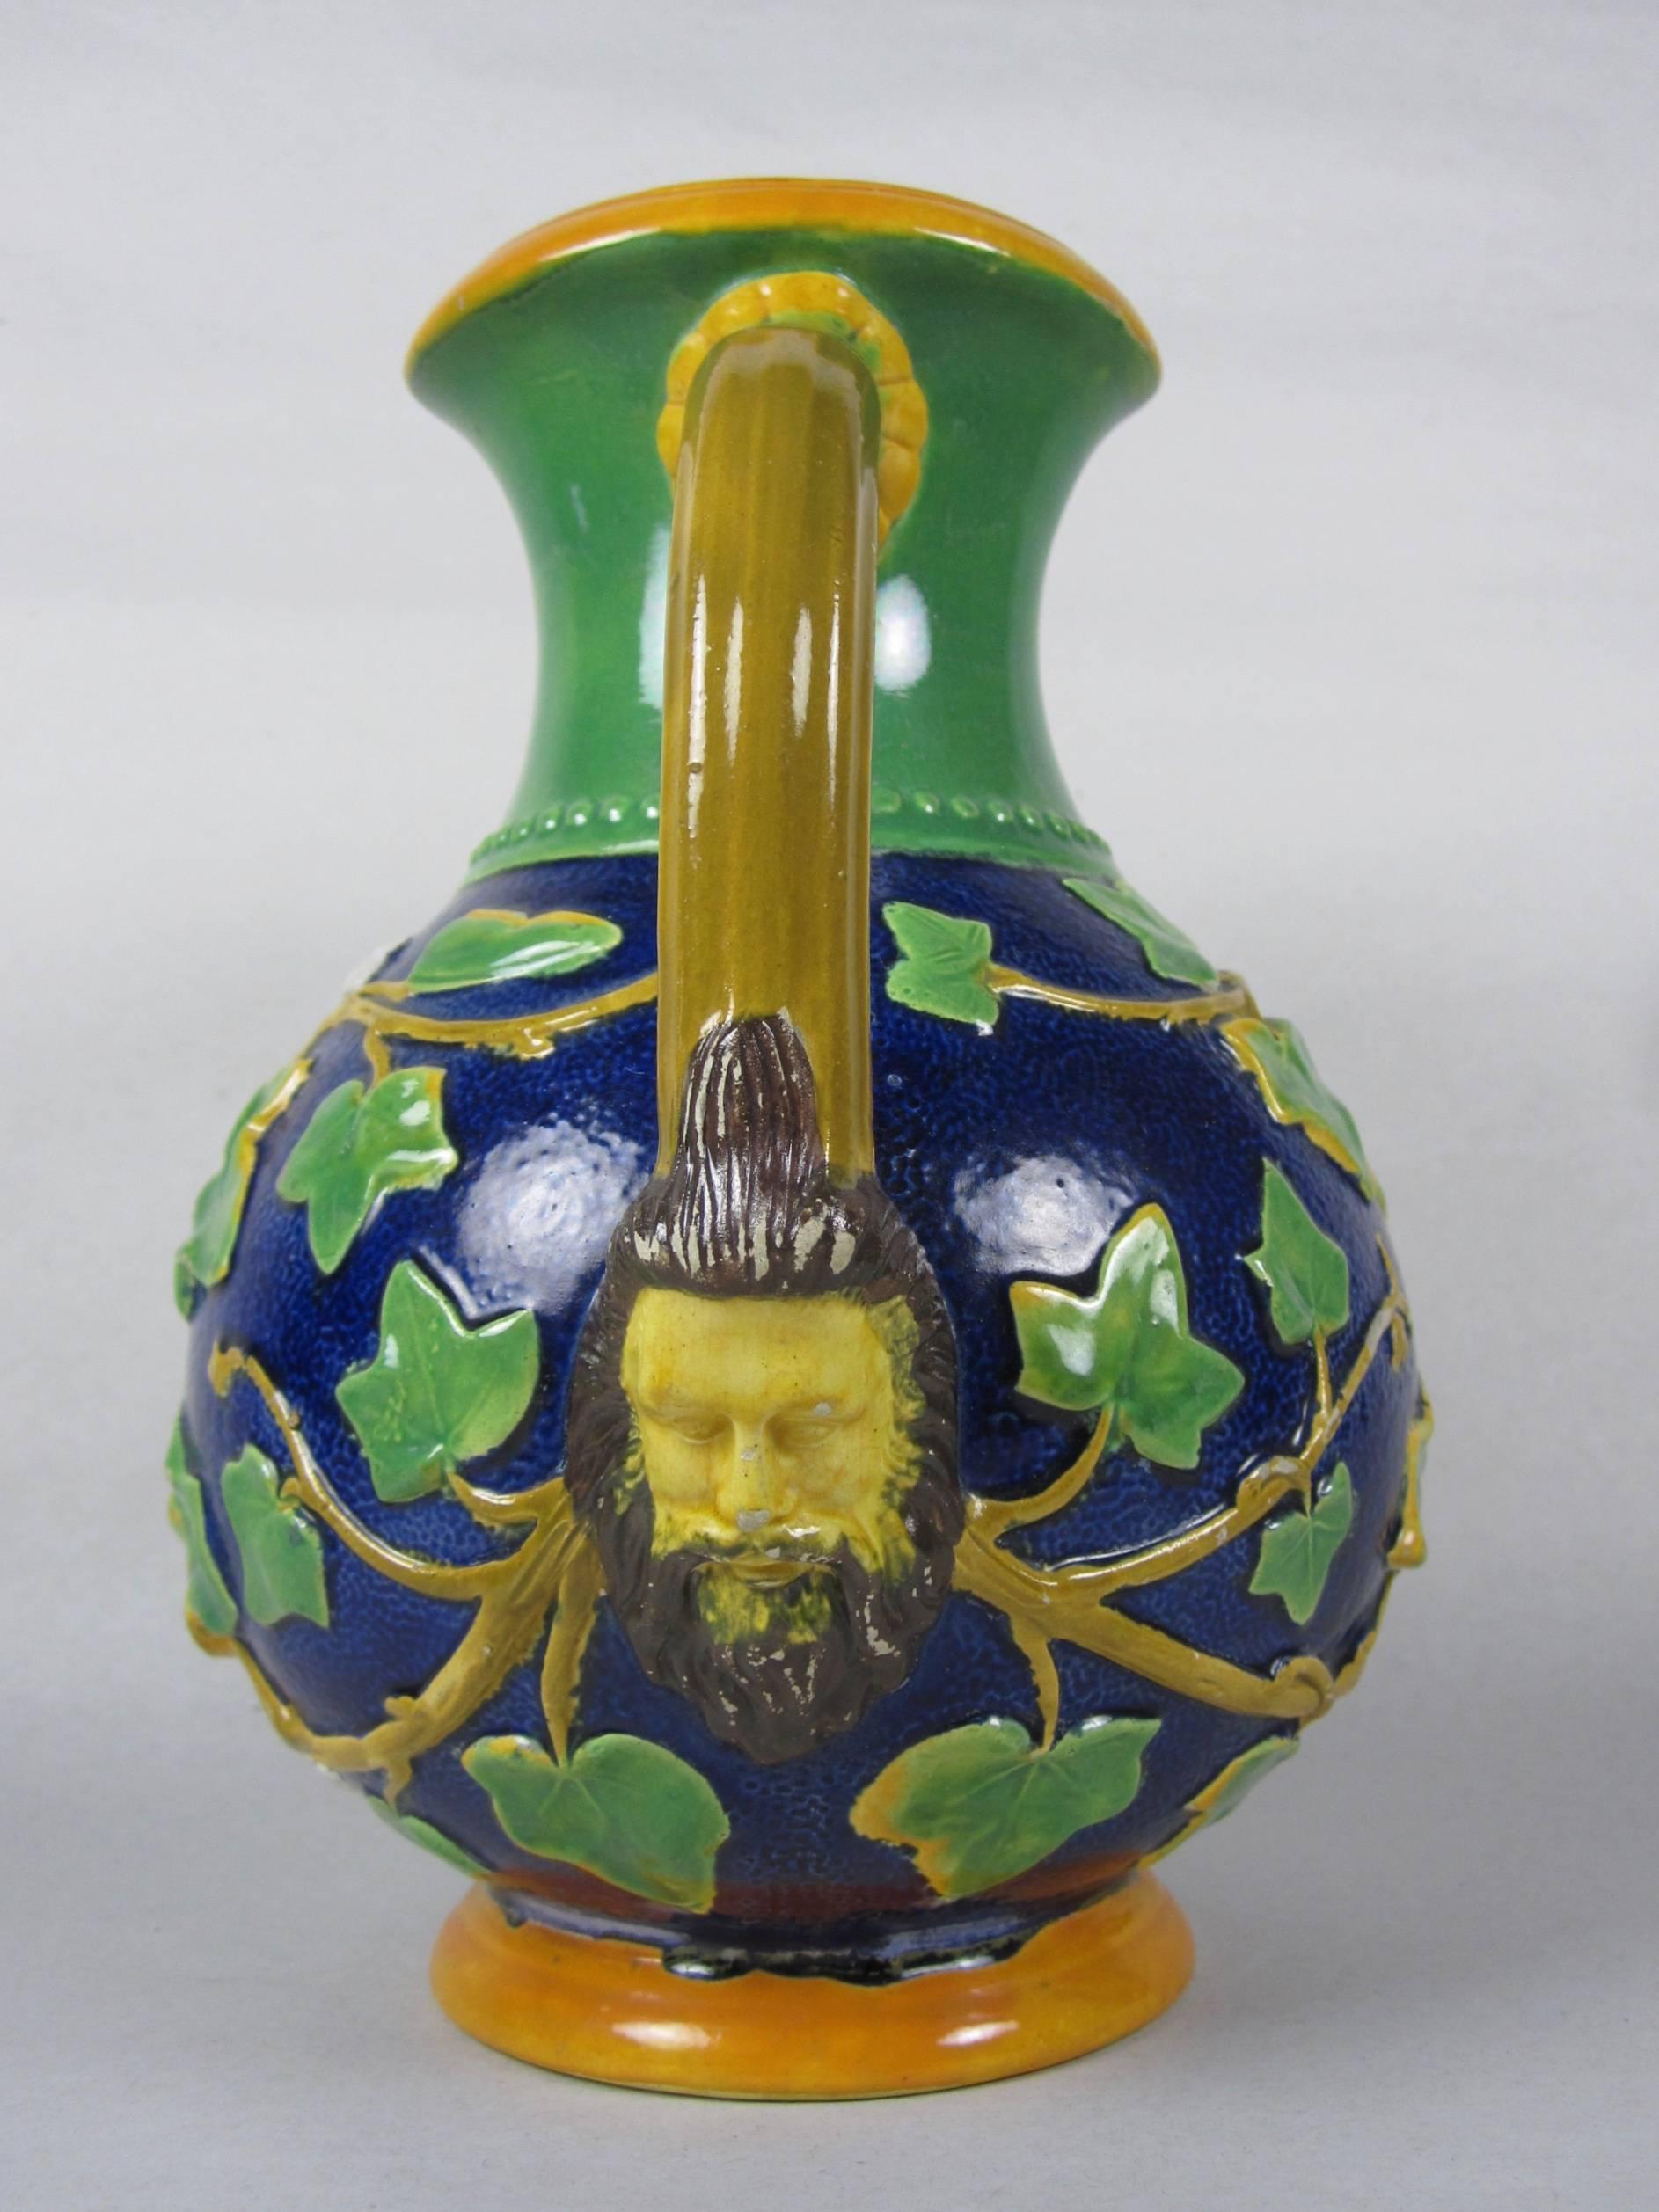 An extremely rare Samuel Alcock & Co., English Majolica Mask and Ivy Pitcher, circa 1875. Fresh to market and never seen before. 

A round bellied cobalt blue body with a broad green collar, a yellow scrolled lip and a brown handle terminating in